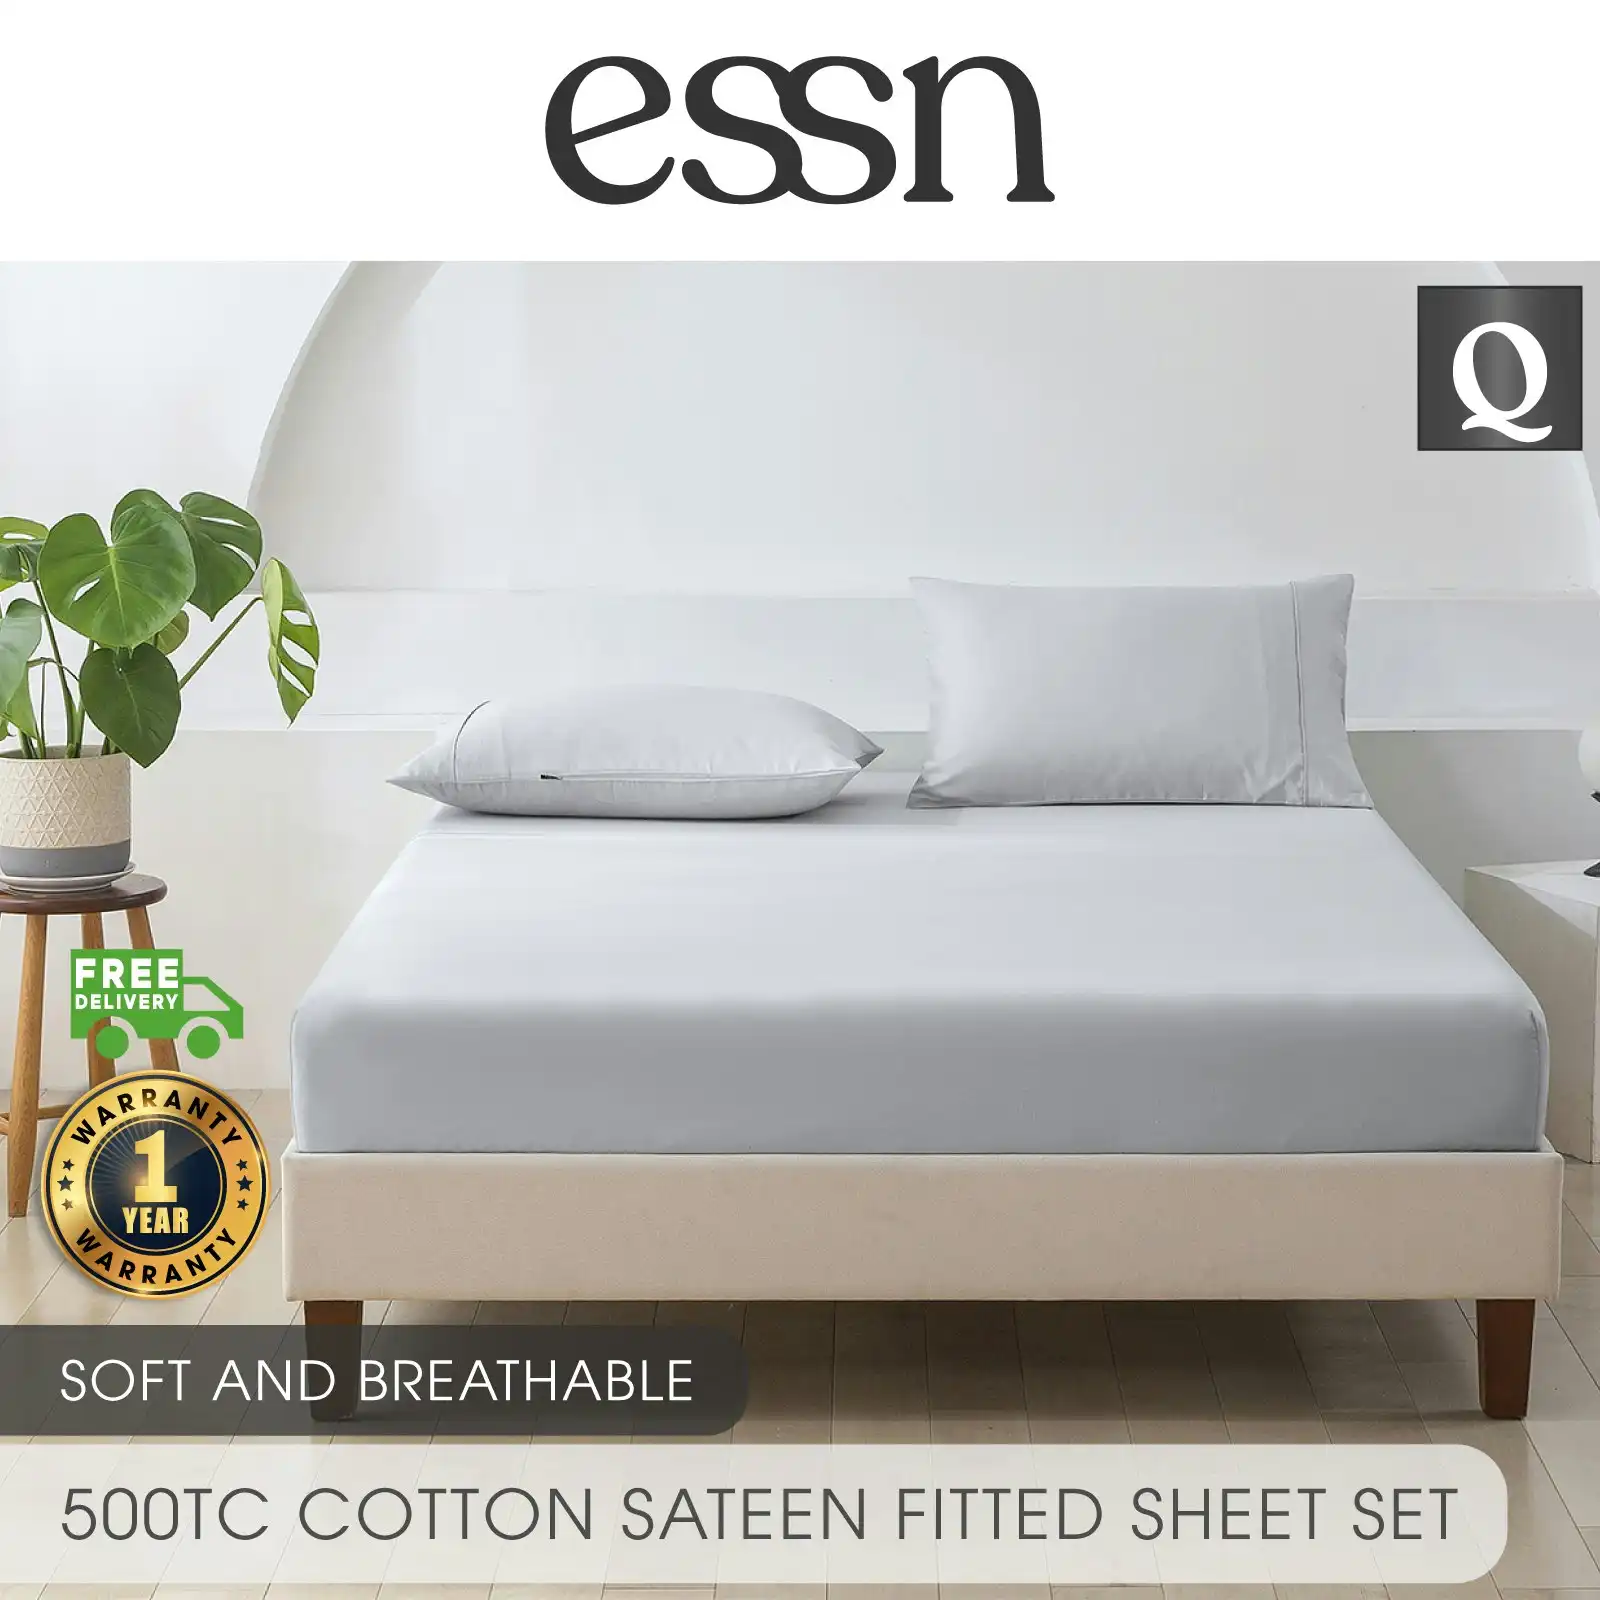 ESSN 500TC Cotton Sateen Fitted Sheet Set Silver Queen Bed